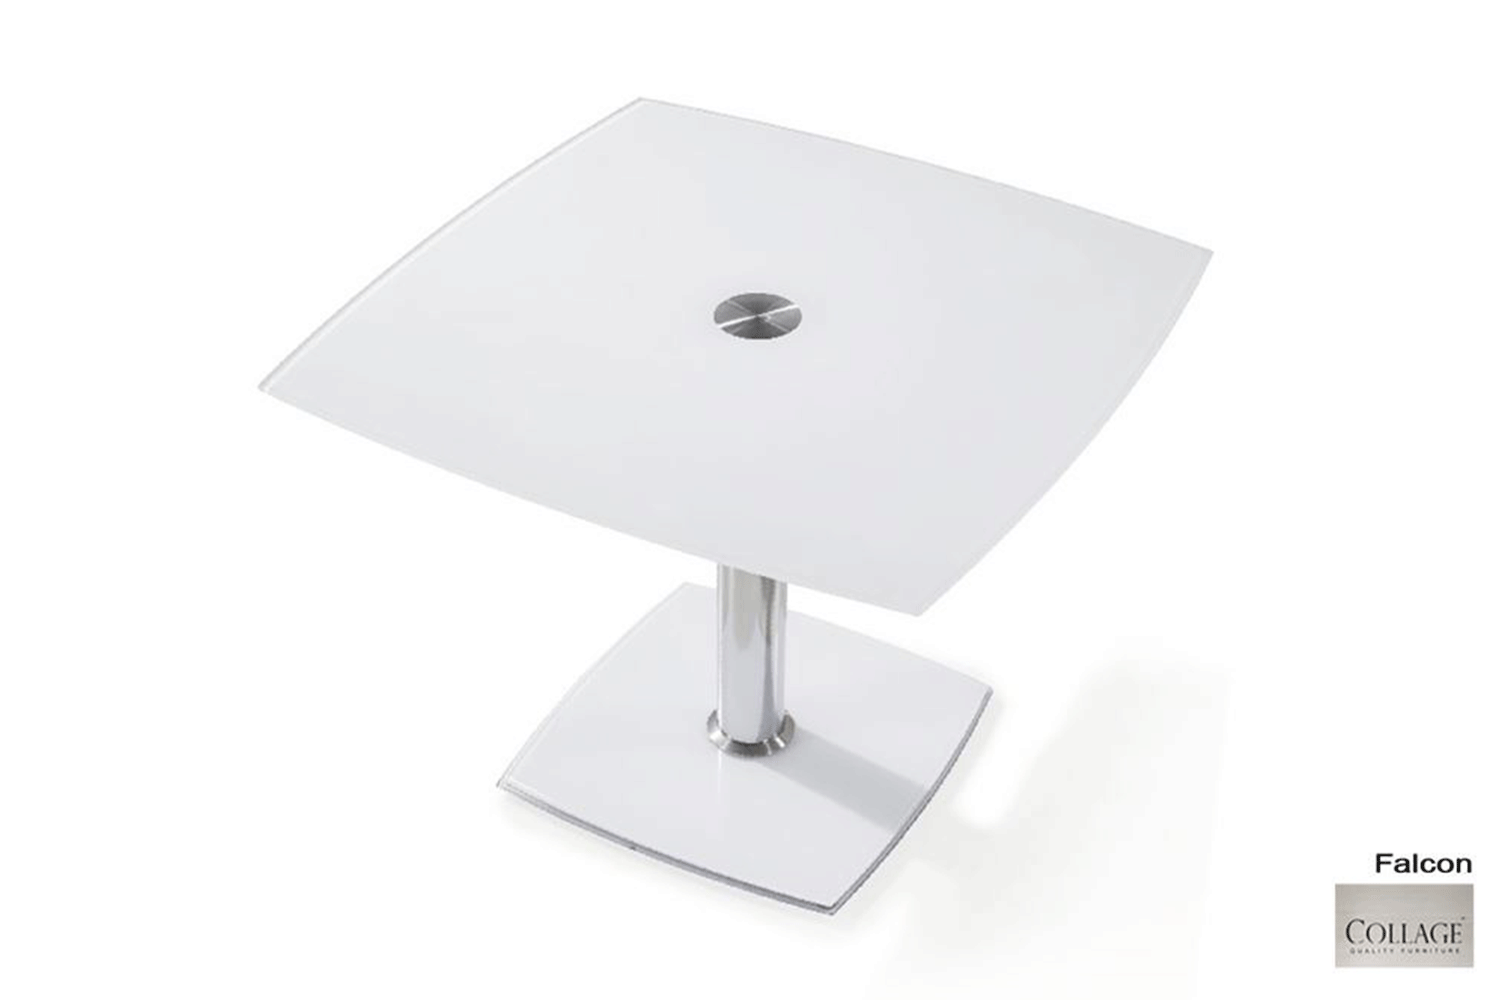 Falcon White Extension Dining Table by Collage